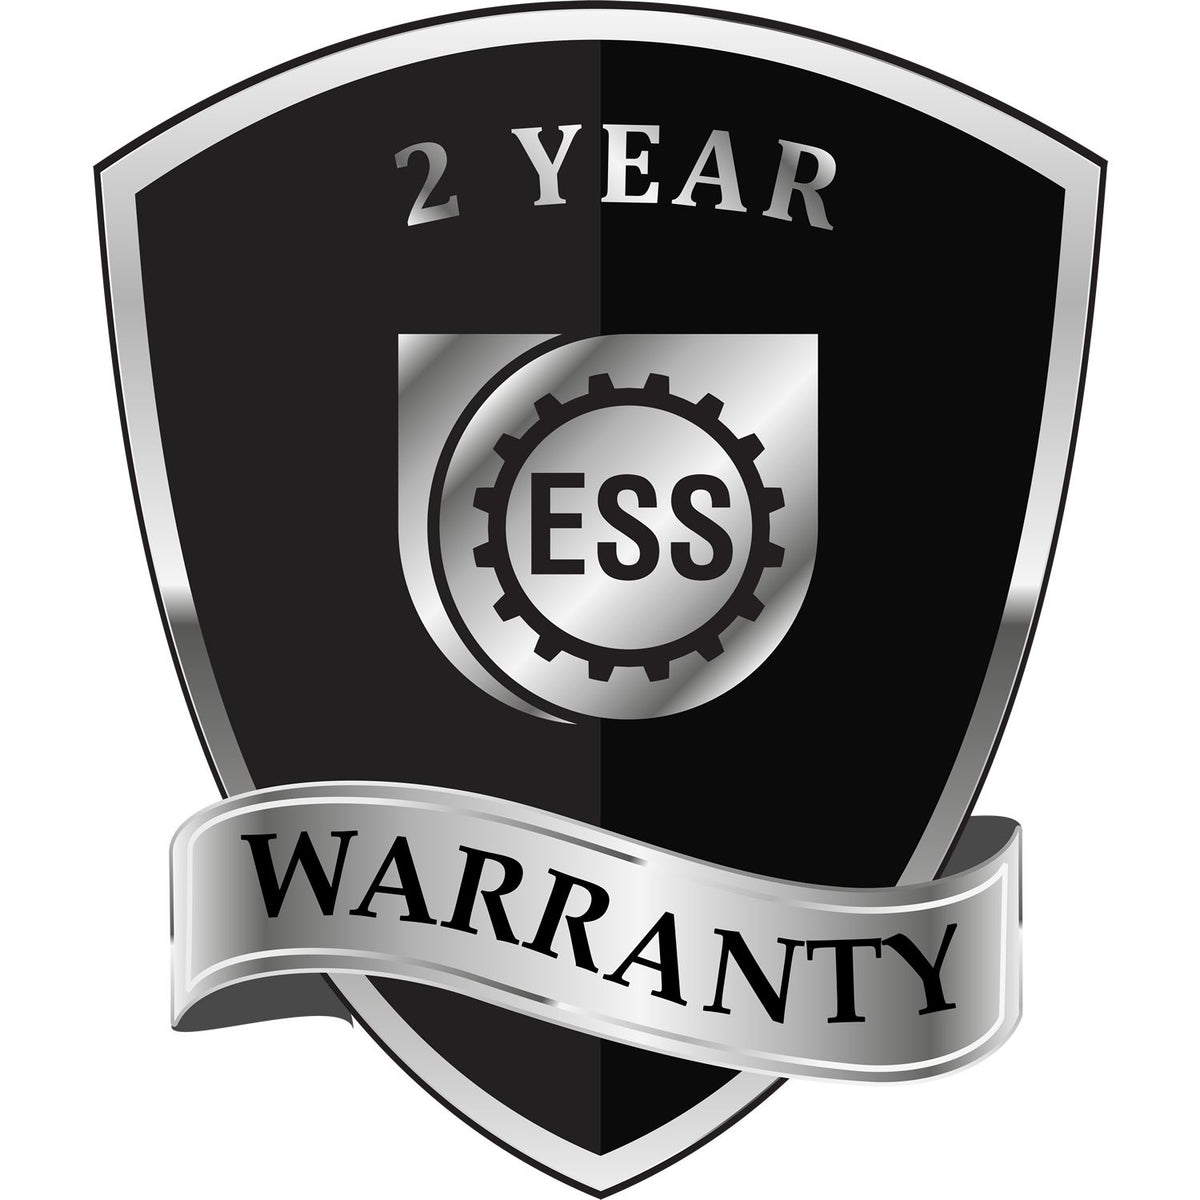 A badge or emblem showing a warranty icon for the Soft Connecticut Professional Engineer Seal